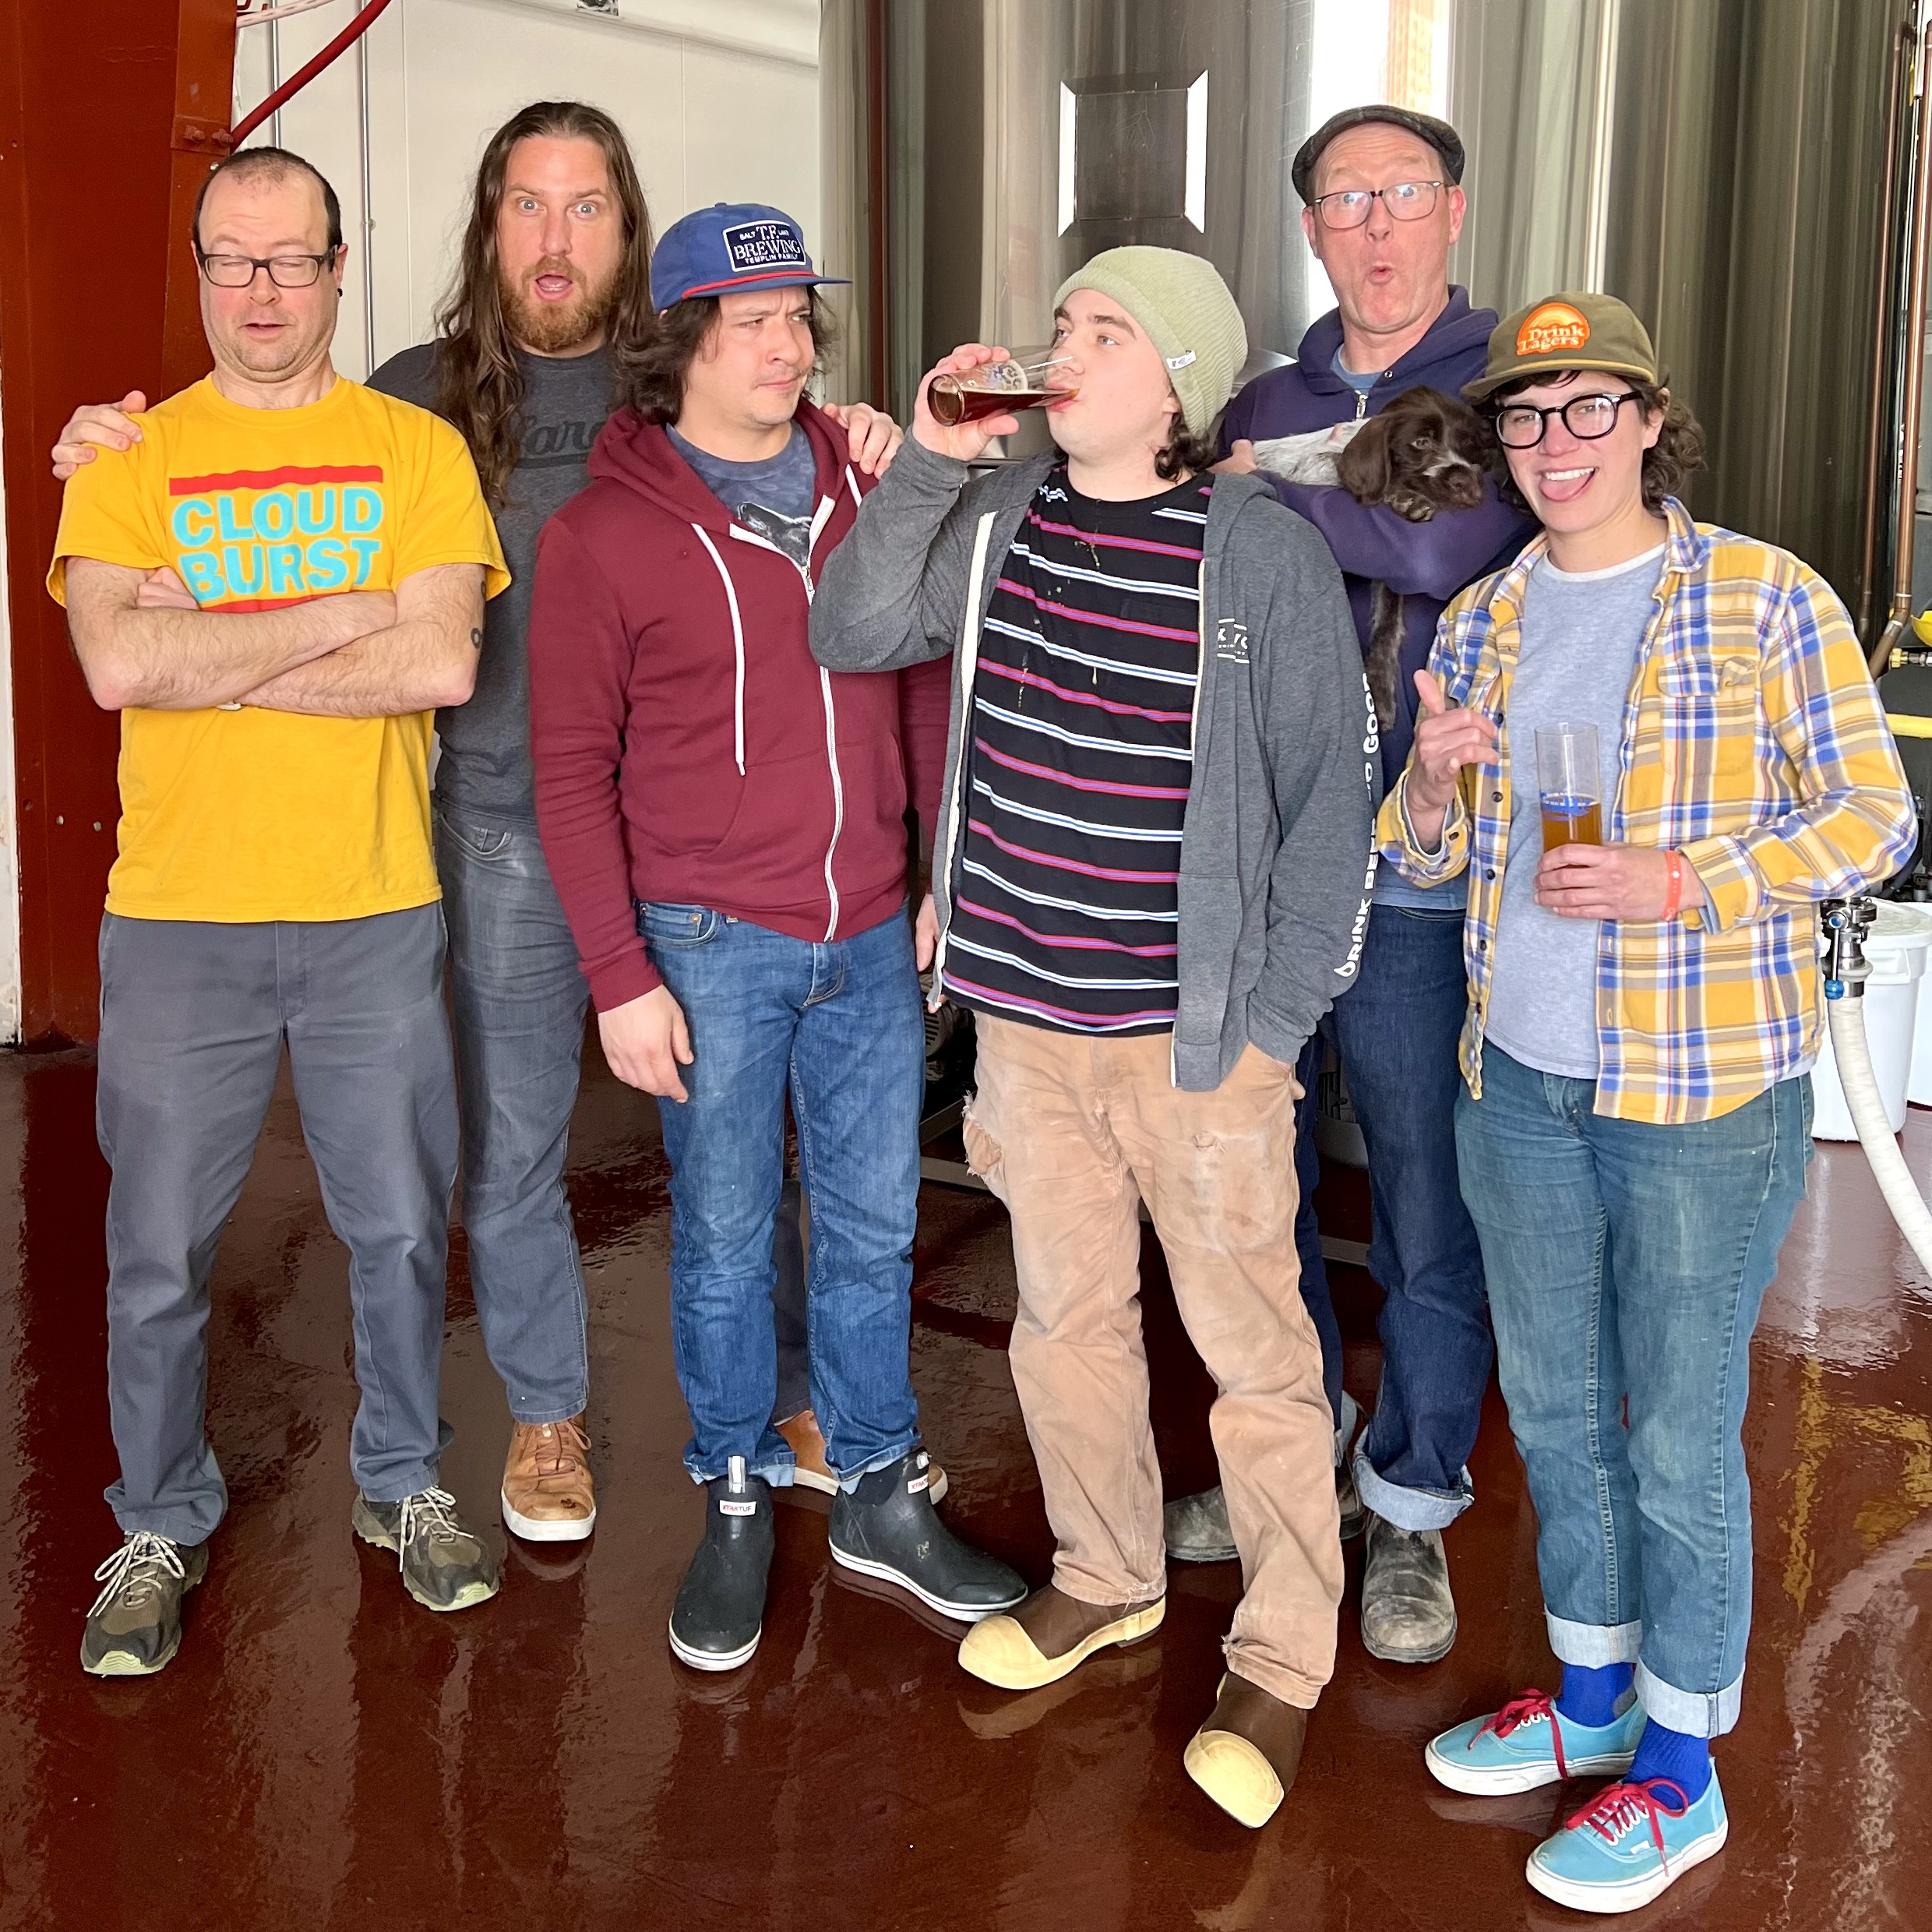 A few weeks back the crew from Gigantic Brewing and Ex Novo Brewing came together to brew Cobra Fang IPA. Unfortunately Ryan Buxton, third from left, will not be here for it as his life was tragically cut short over the weekend. (image courtesy of Gigantic Brewing)